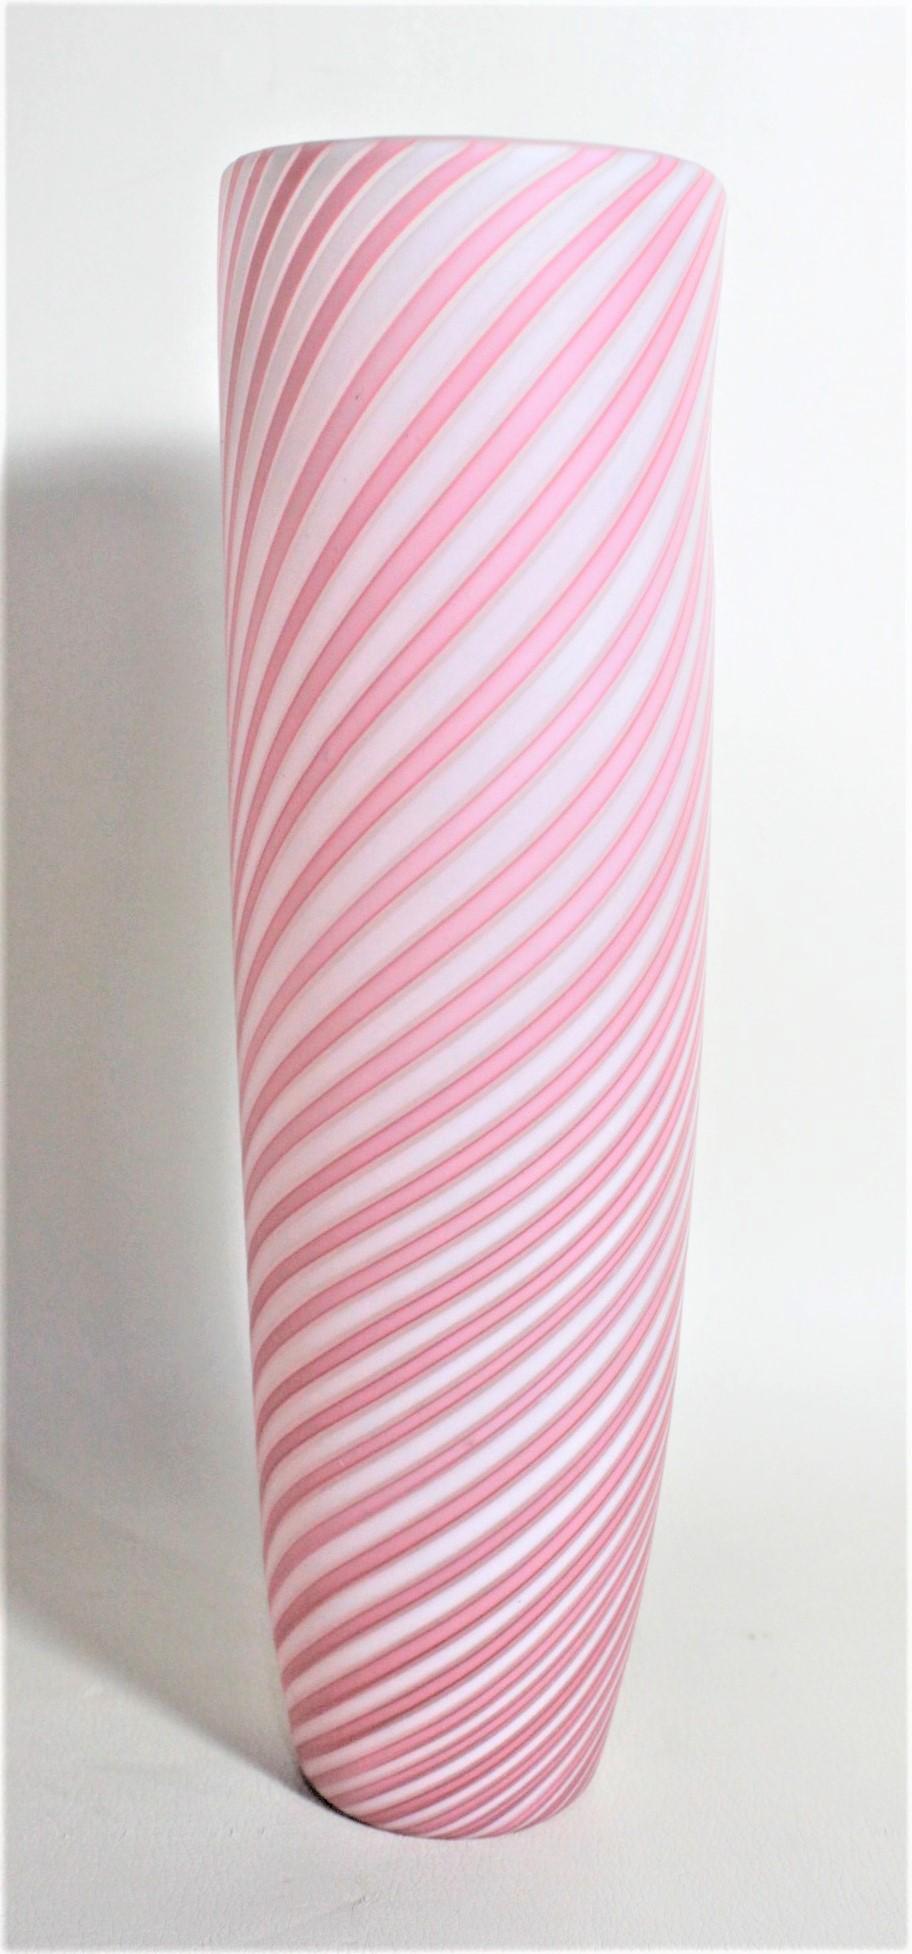 Italian Mid-Century Modern Murano Cranberry or Pink and White Striped Art Glass Vase